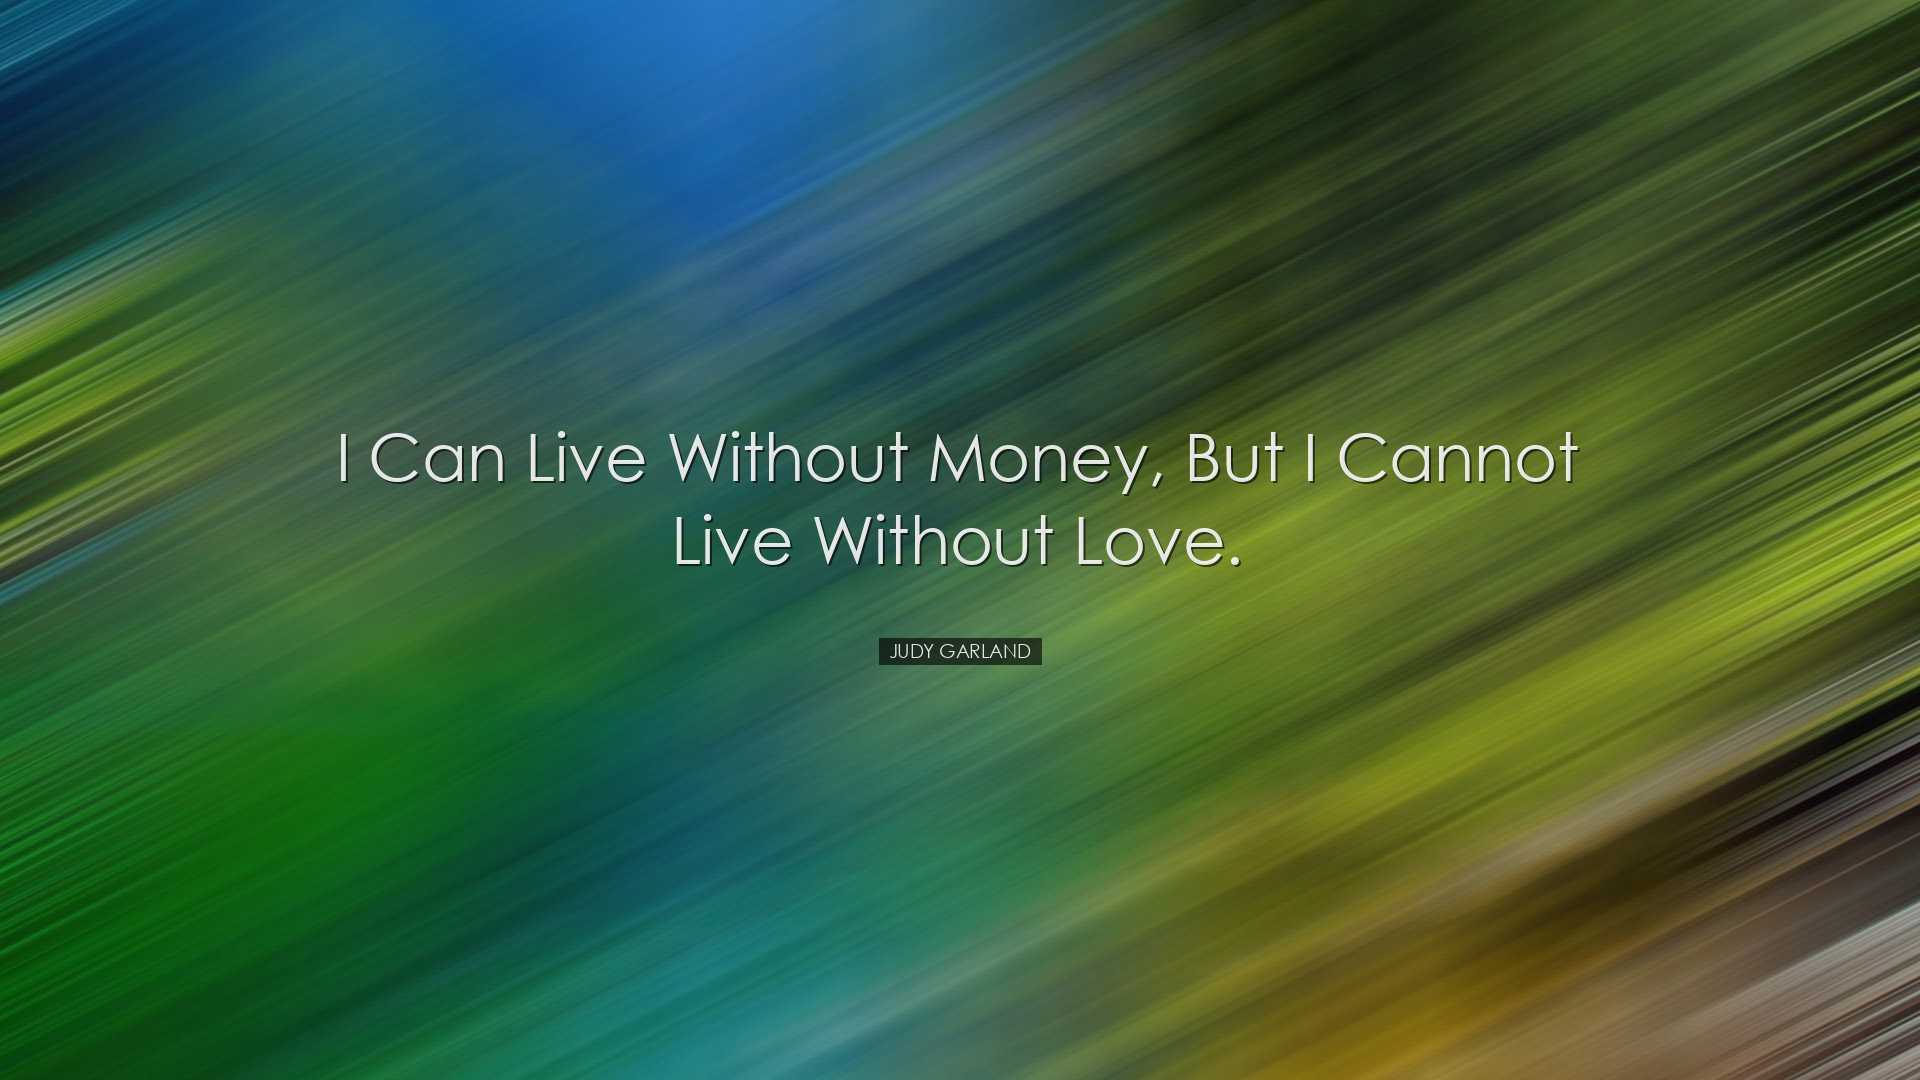 I can live without money, but I cannot live without love. - Judy G